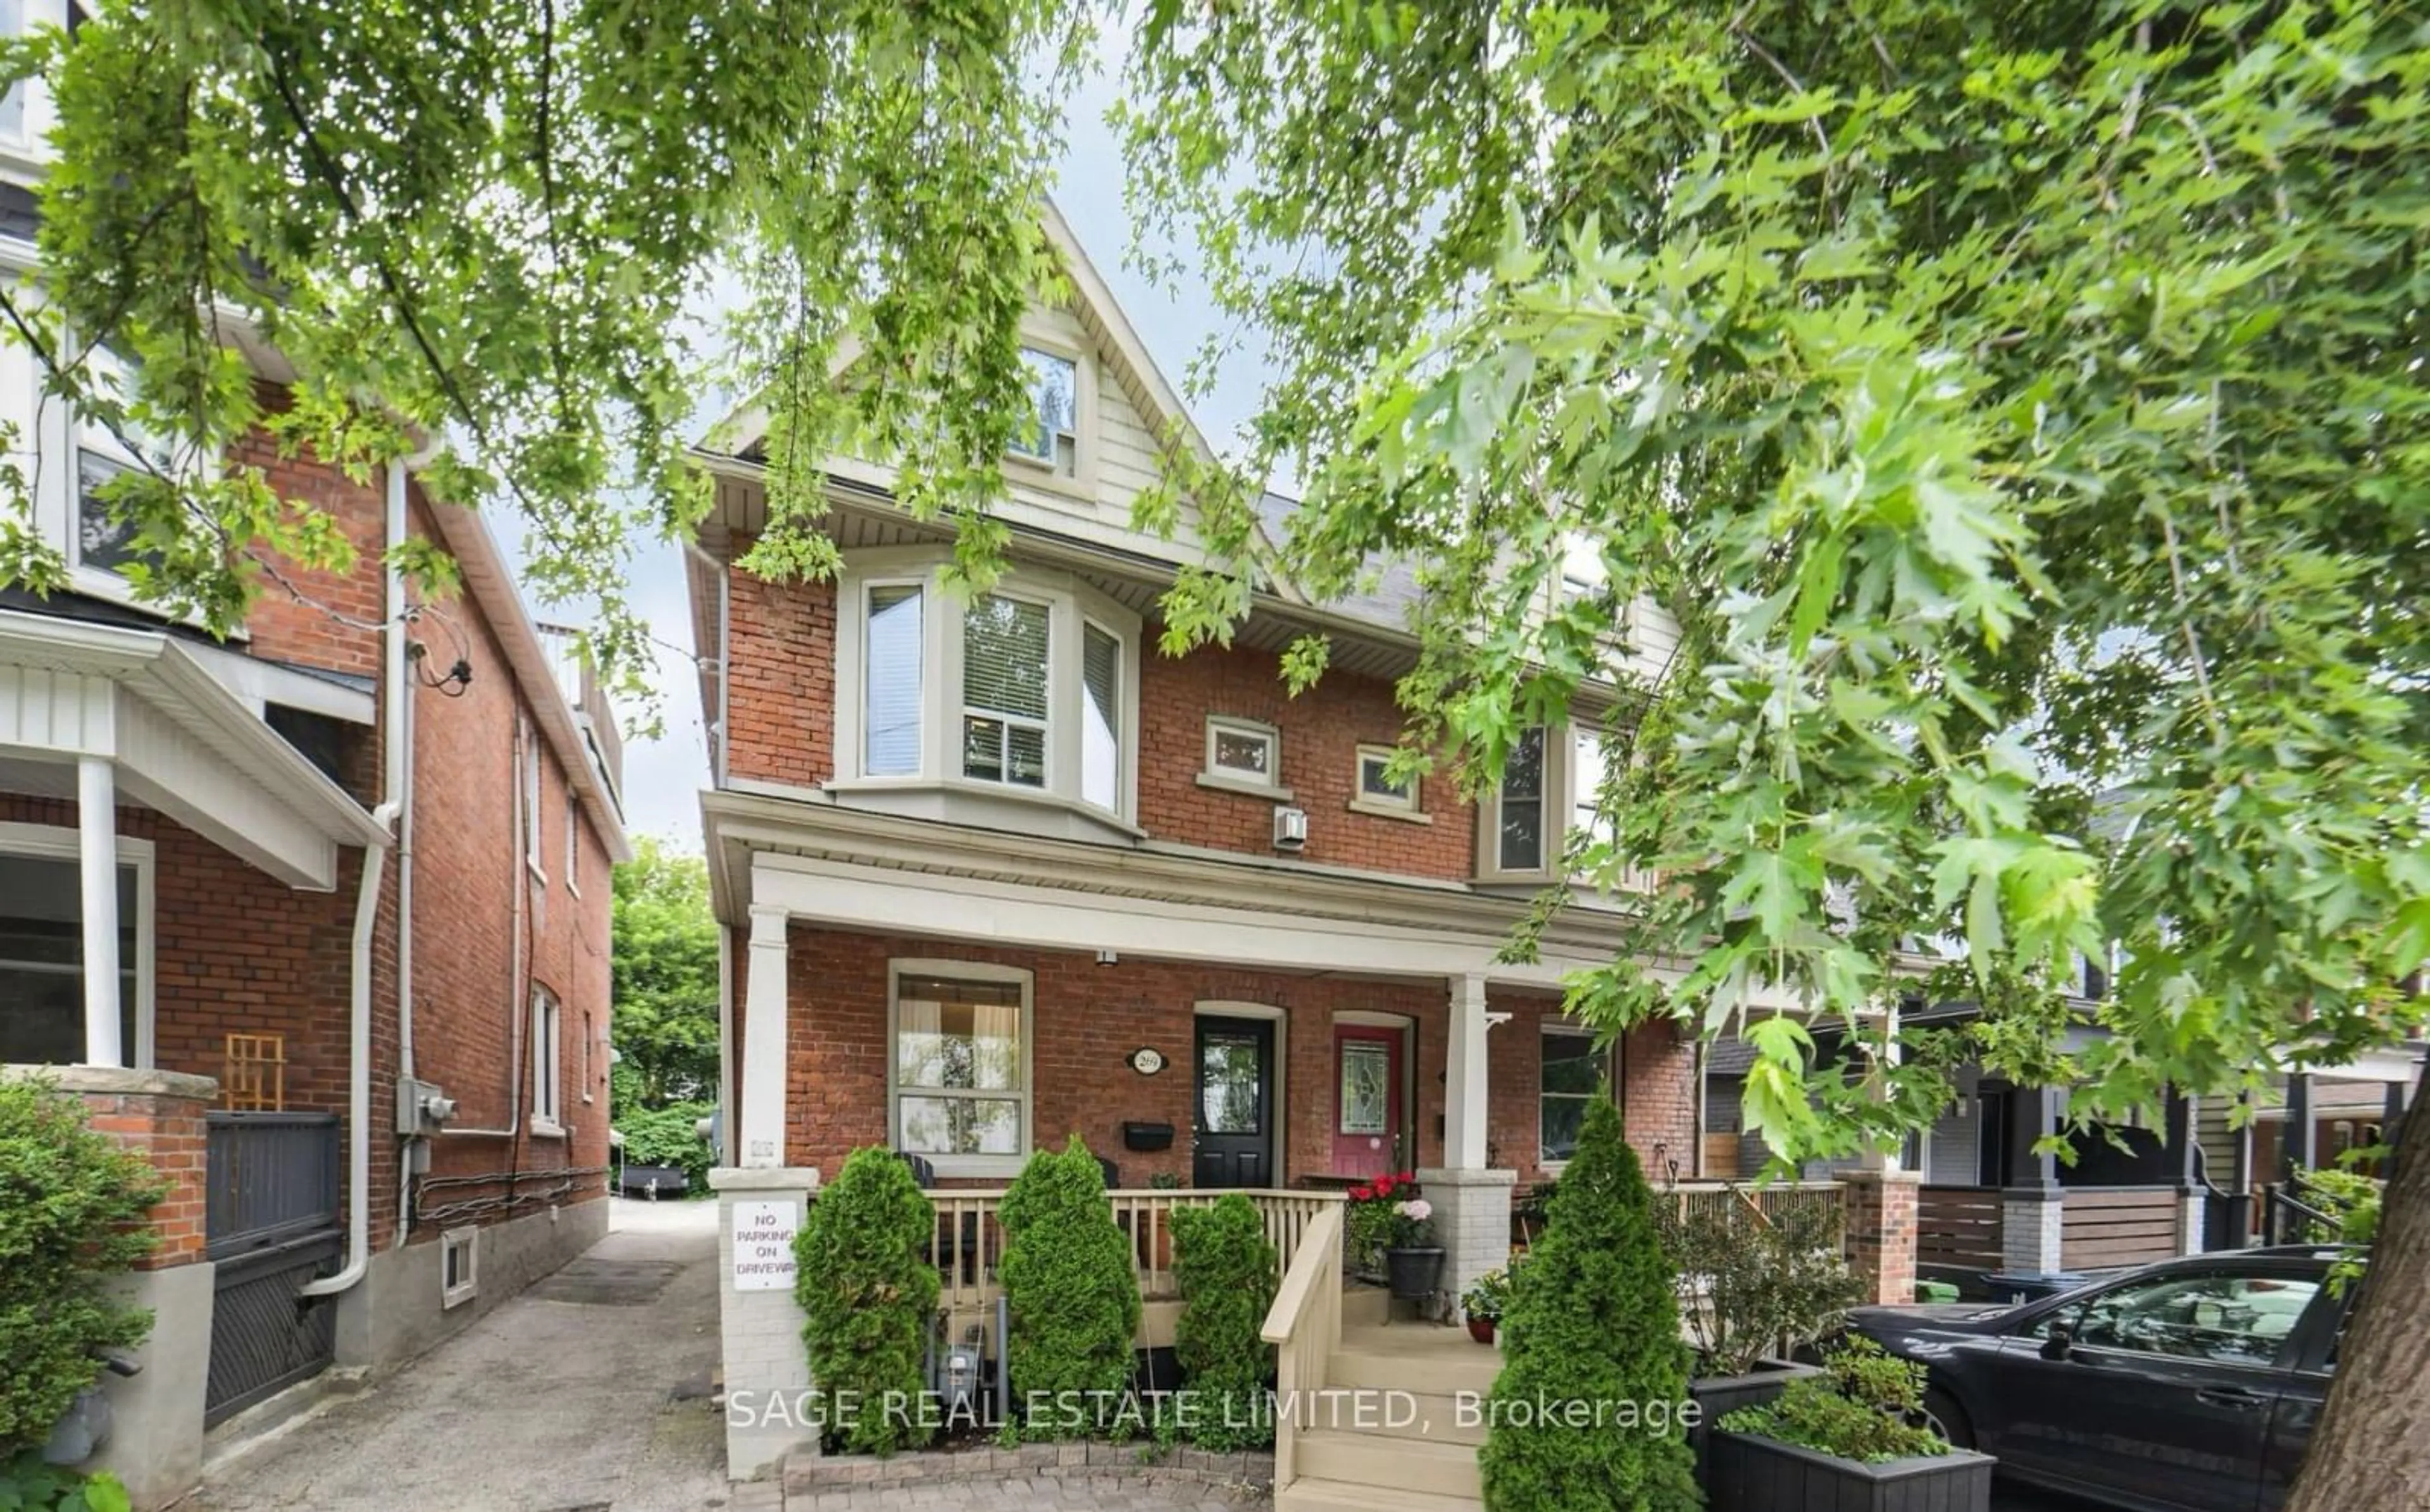 Home with brick exterior material for 269 Woodbine Ave, Toronto Ontario M4L 3P3